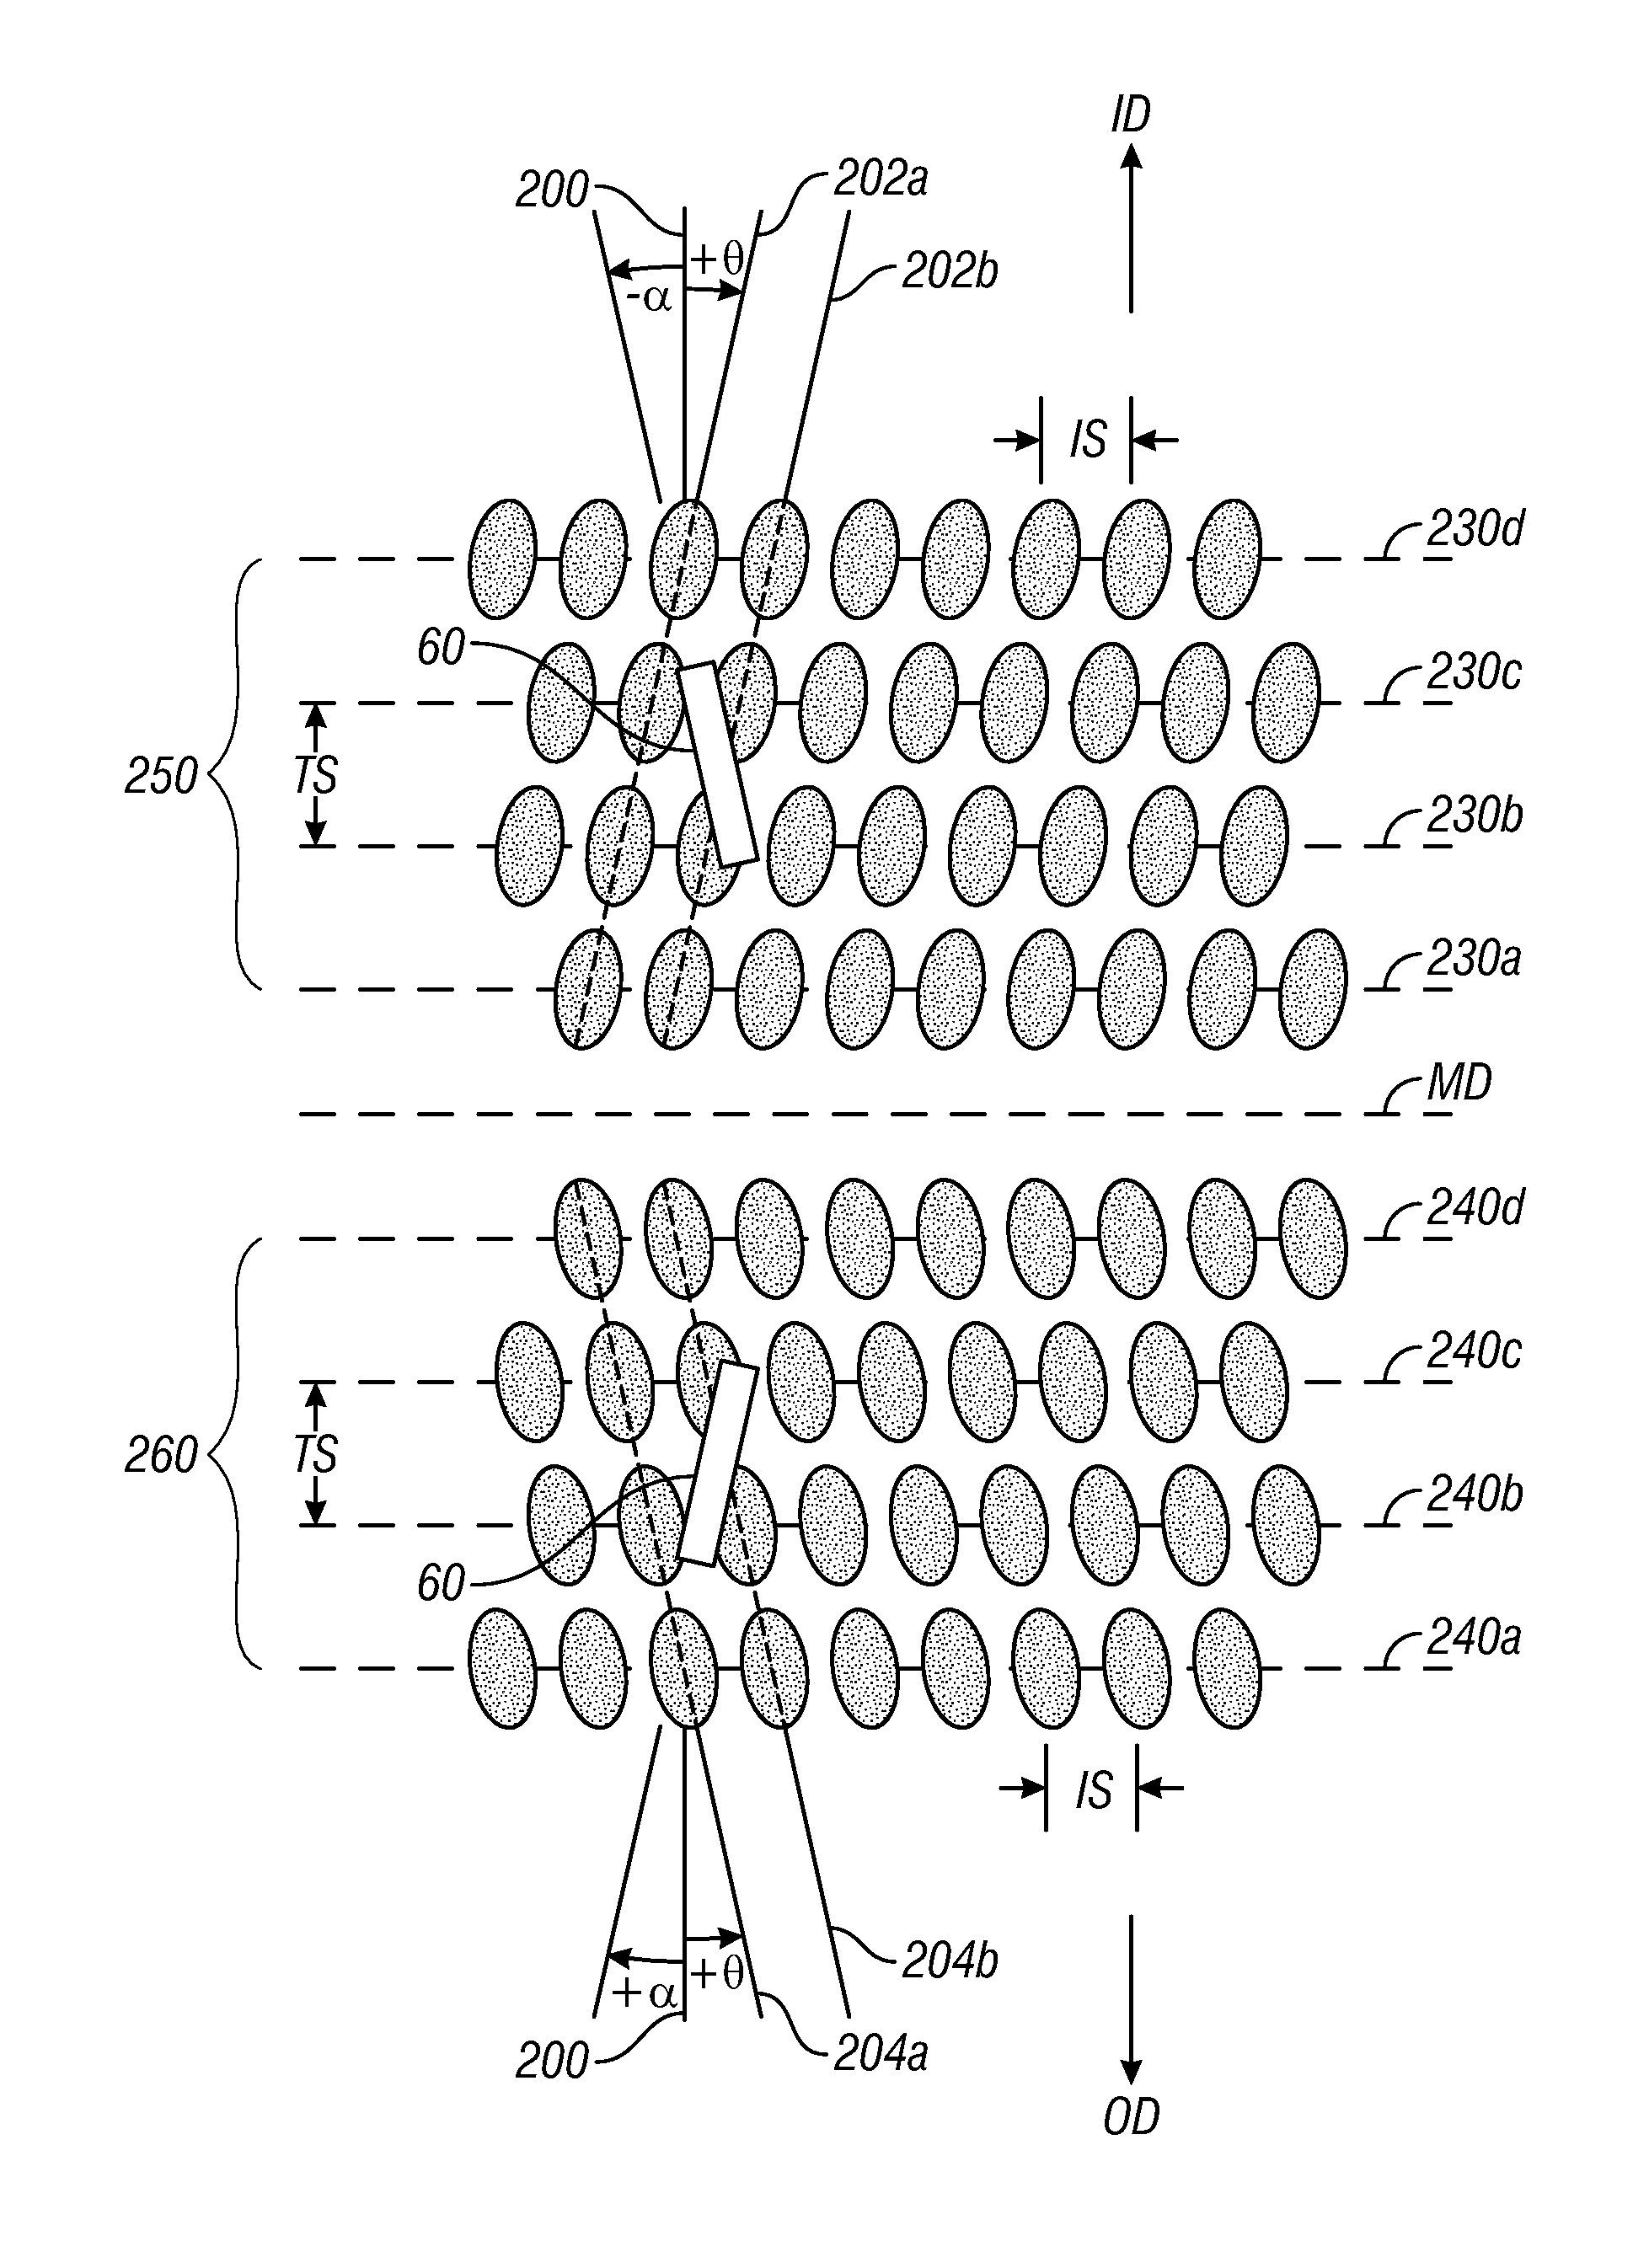 Patterned magnetic recording disk for multi-track recording with compensation for head skew